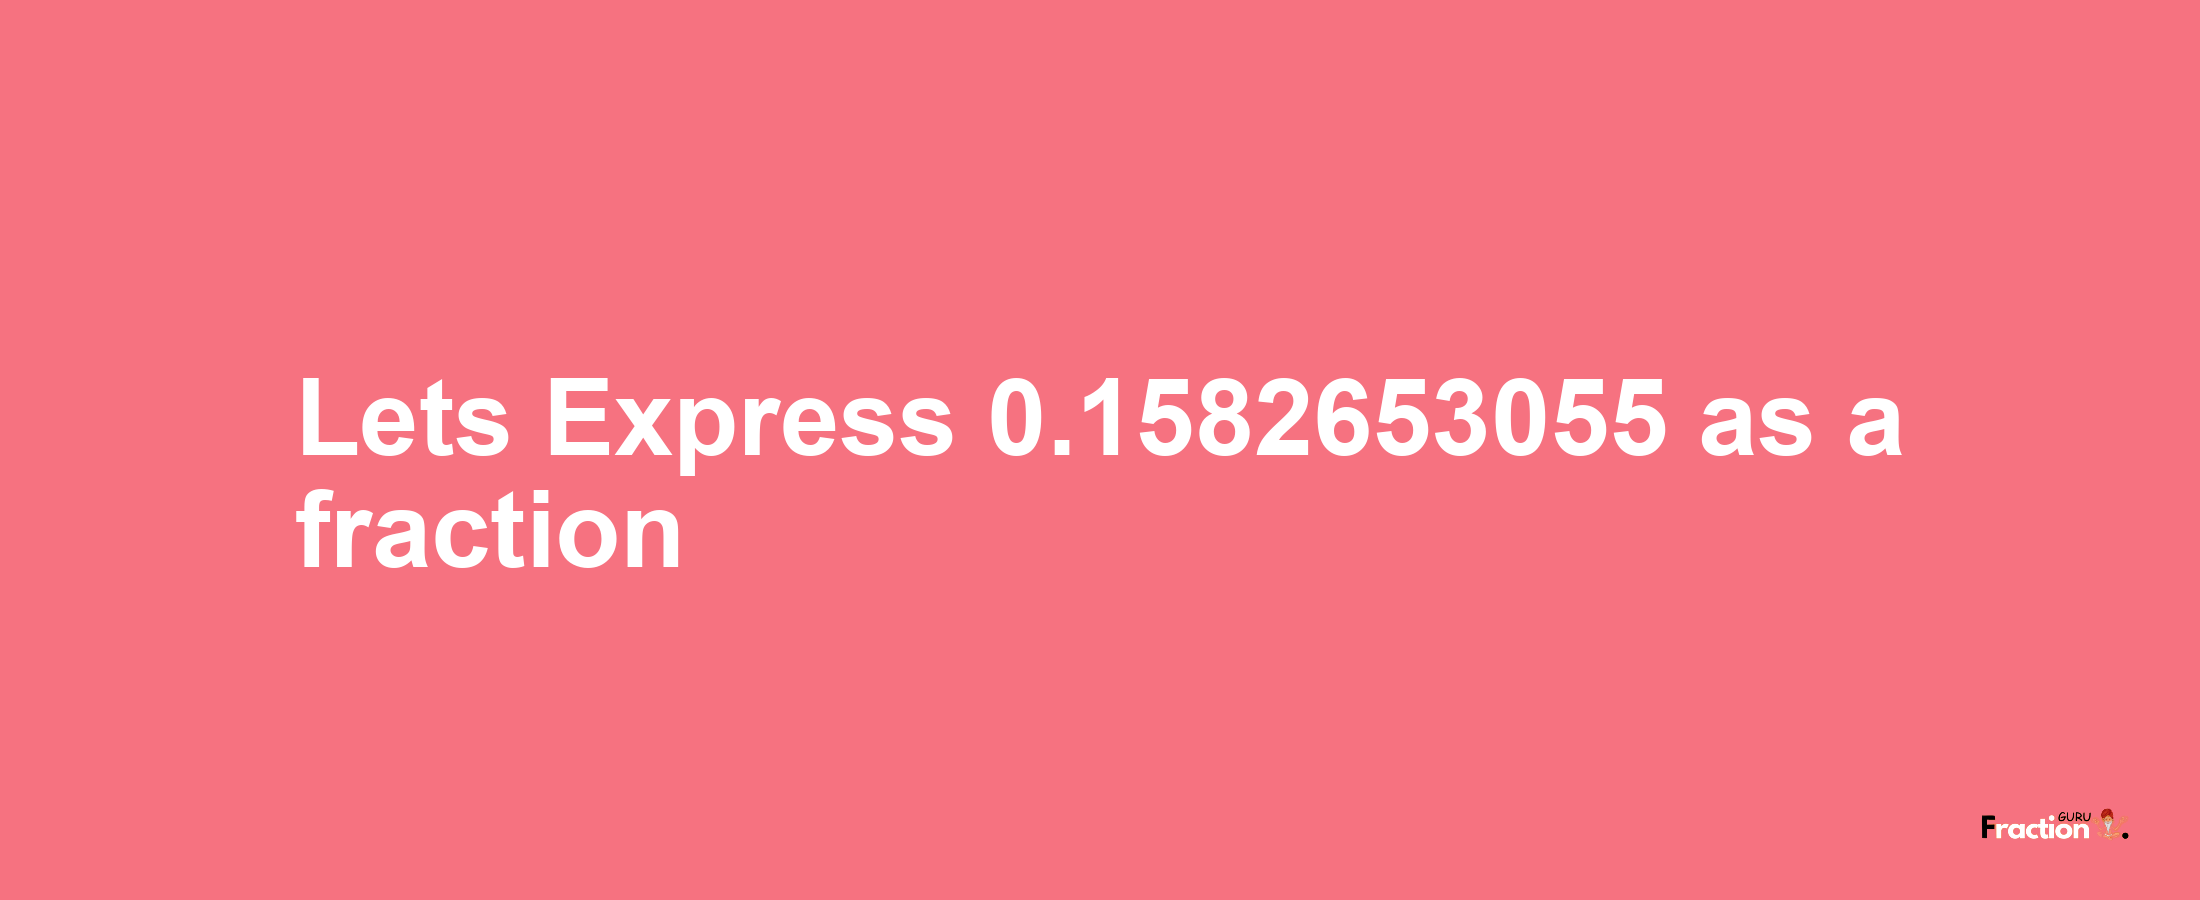 Lets Express 0.1582653055 as afraction